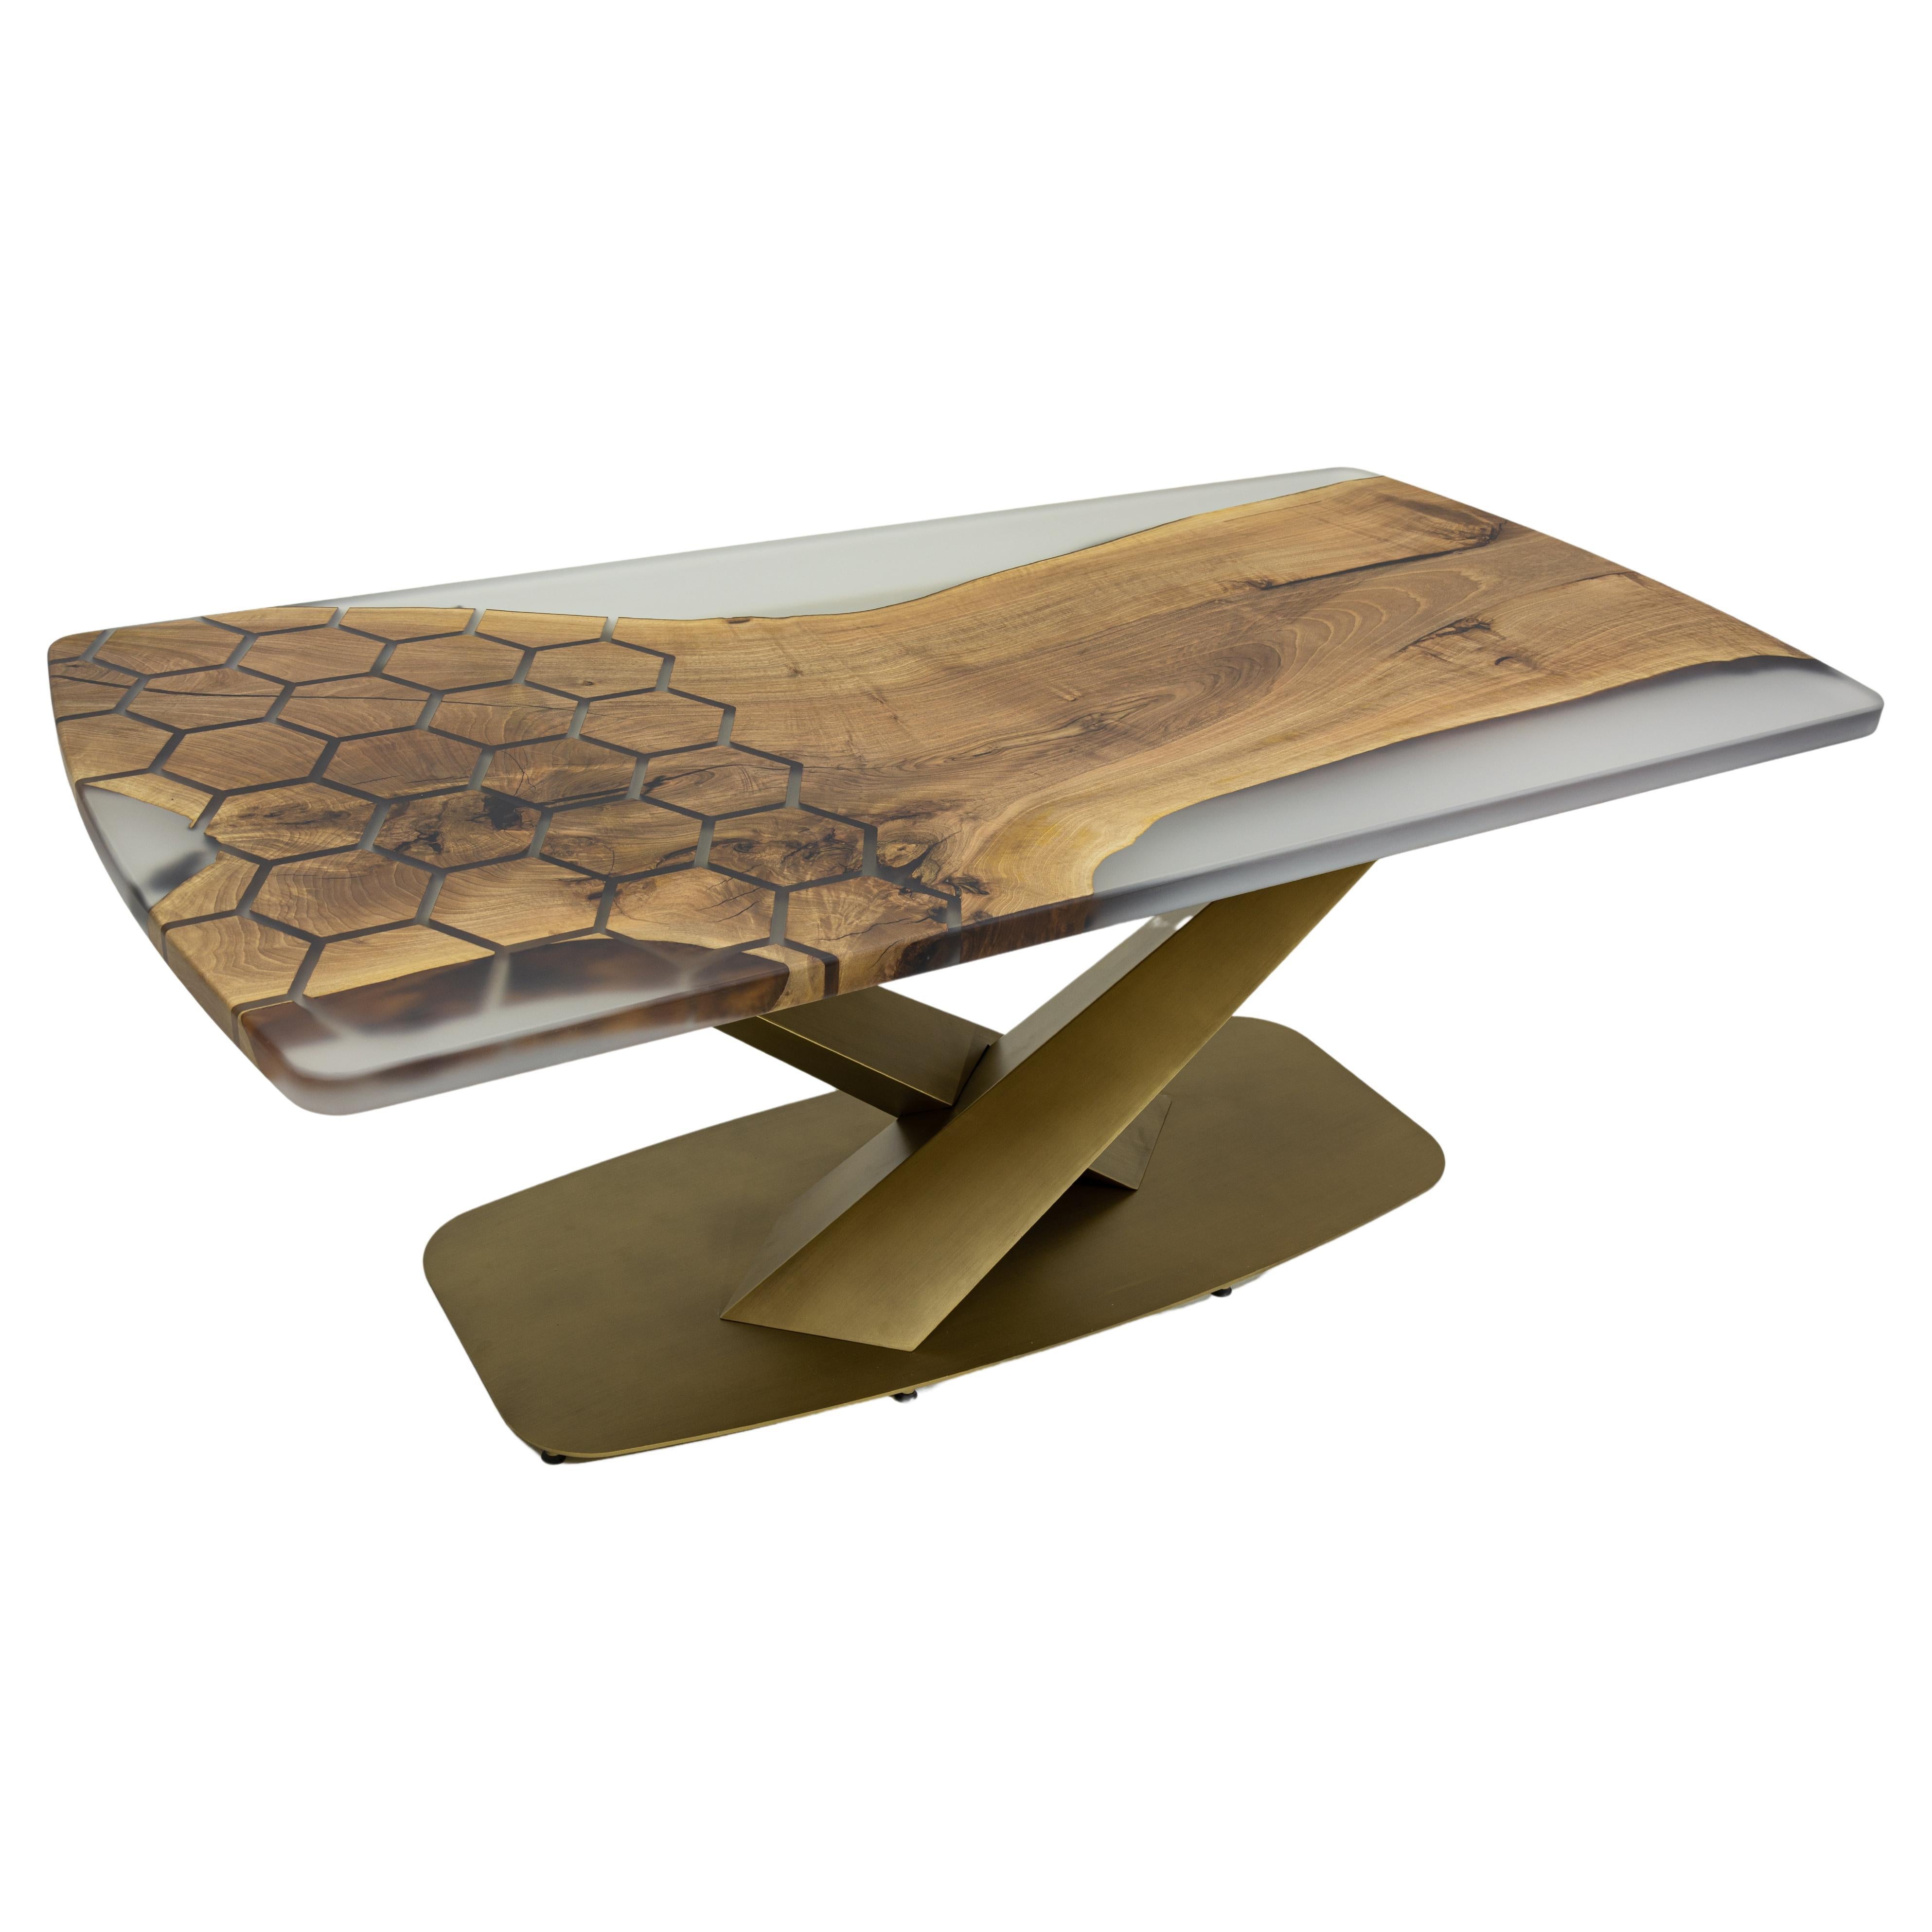 Custom Epoxy Resin Walnut Table

Inspired by the bee's honeycomb, this product is a combination of antique walnut and epoxy. 
Each table is made of natural woods. Therefore, each one has its own natural shape. 

We can make this table in any size or